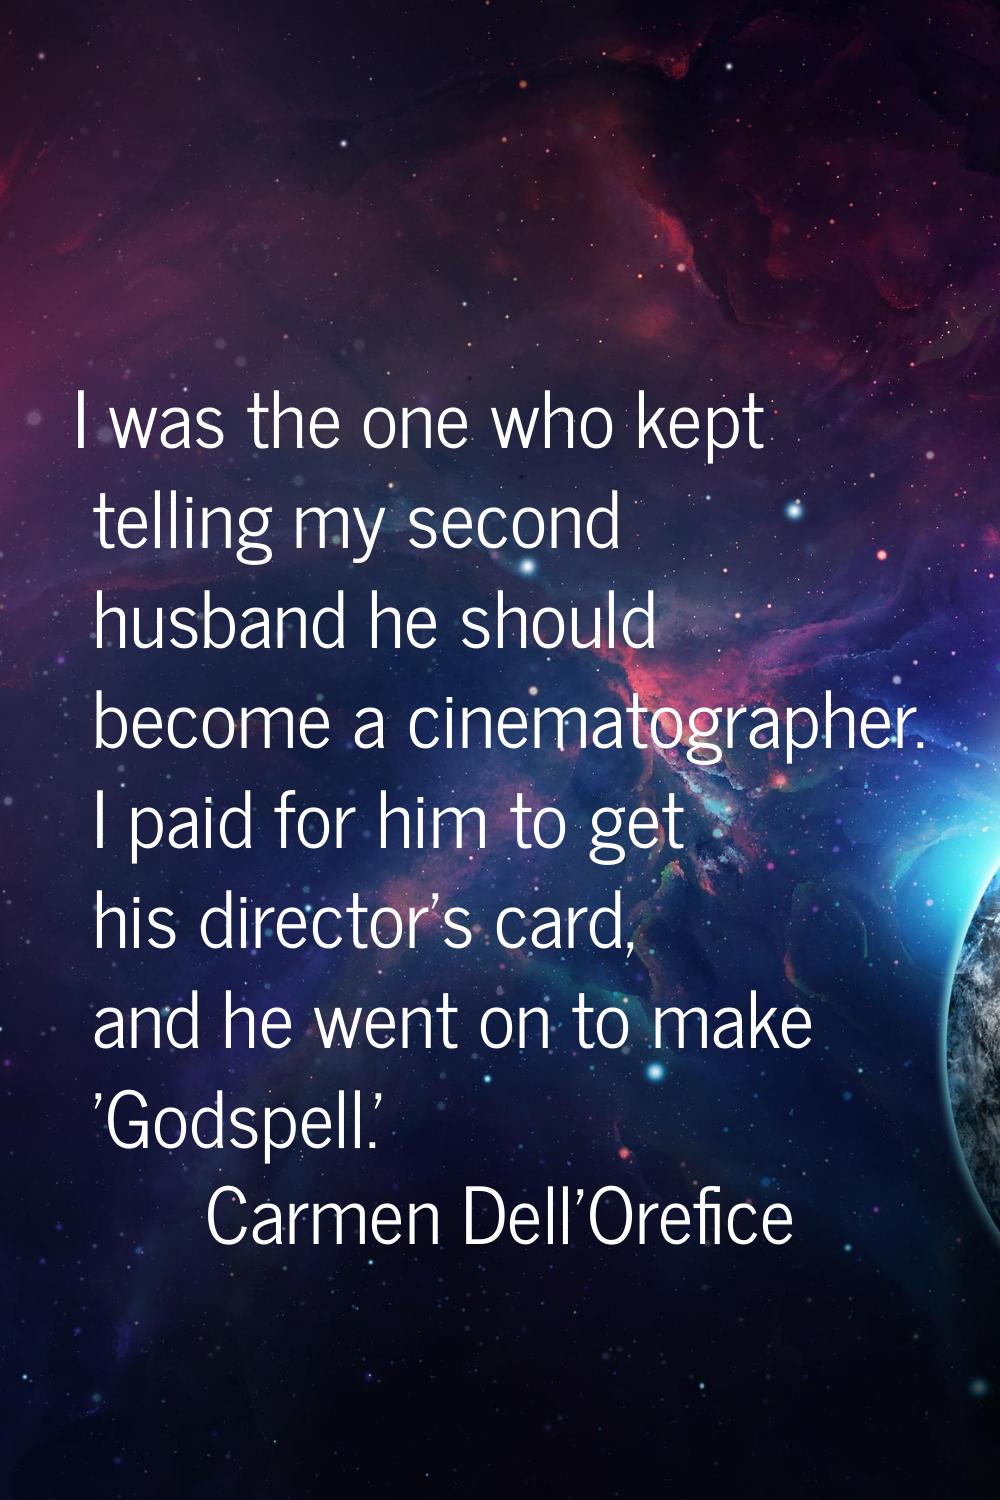 I was the one who kept telling my second husband he should become a cinematographer. I paid for him